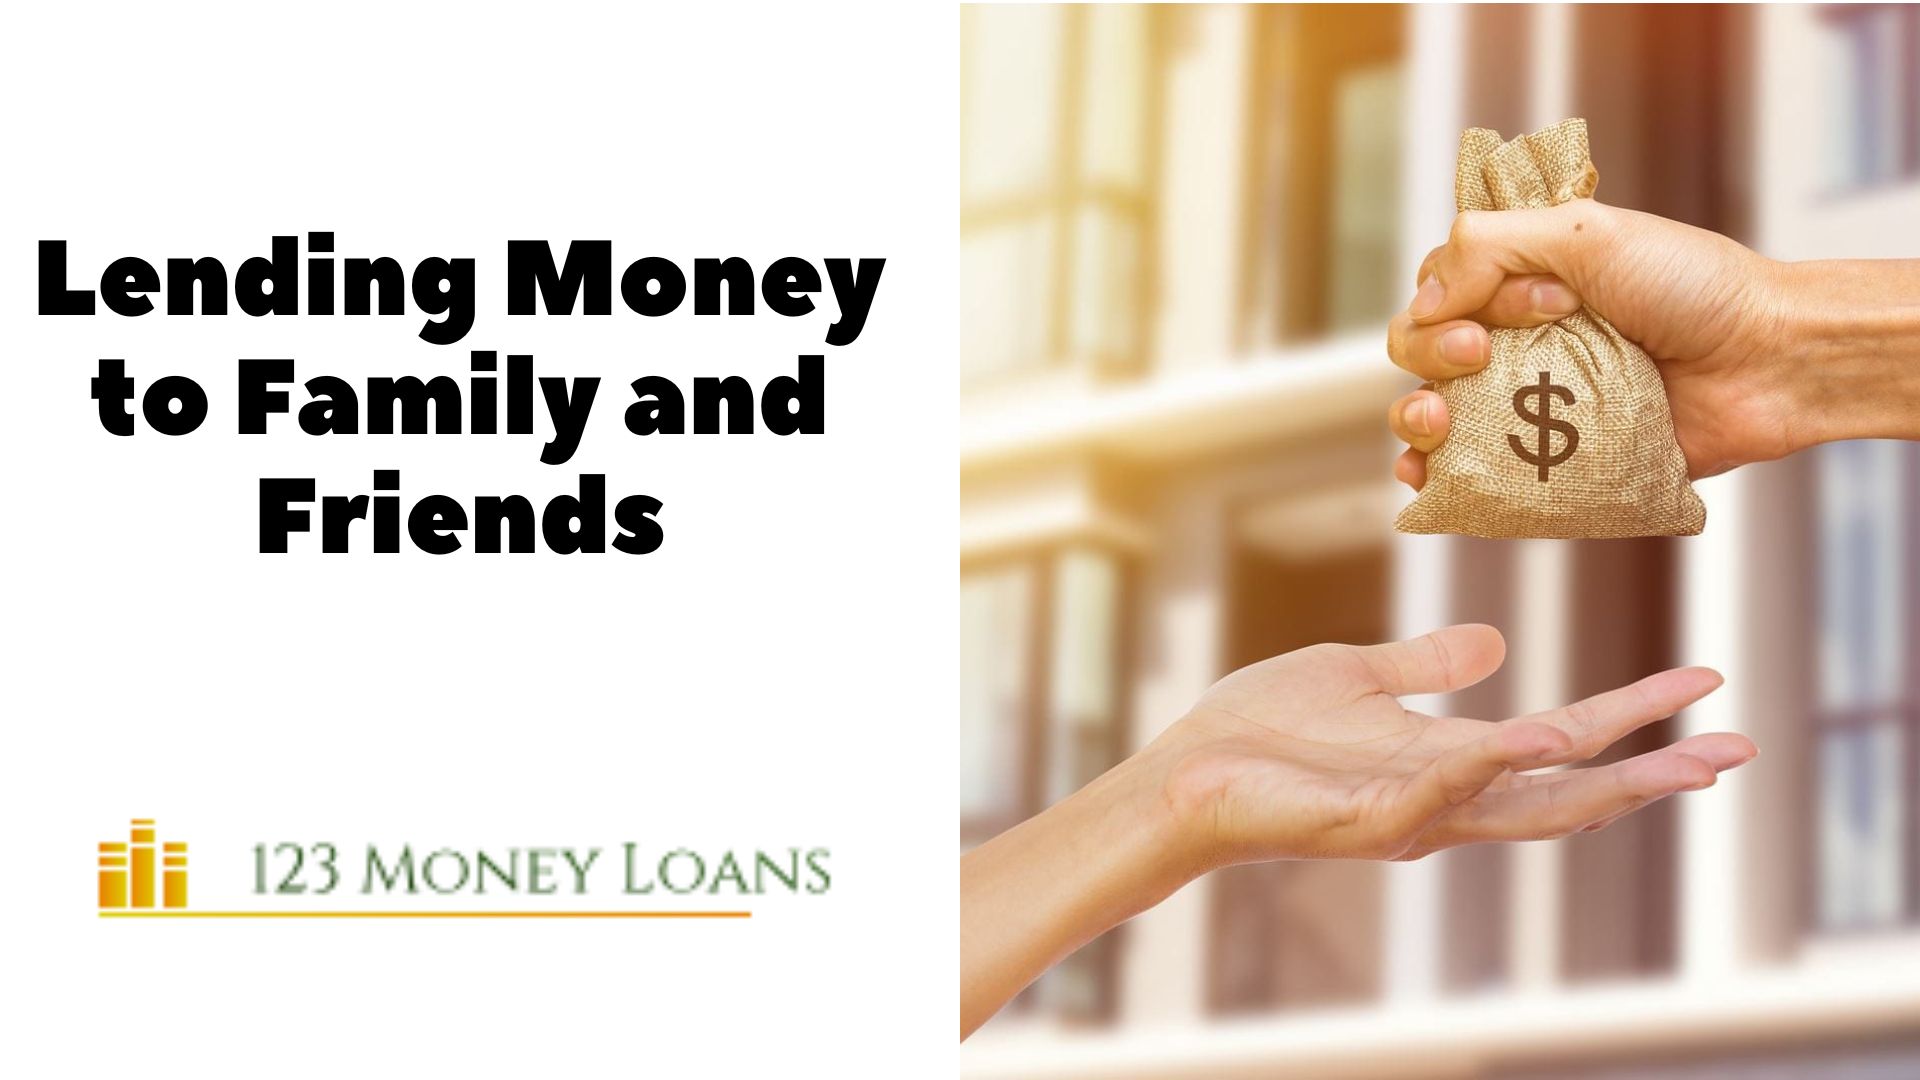 Lending Money to Family and Friends